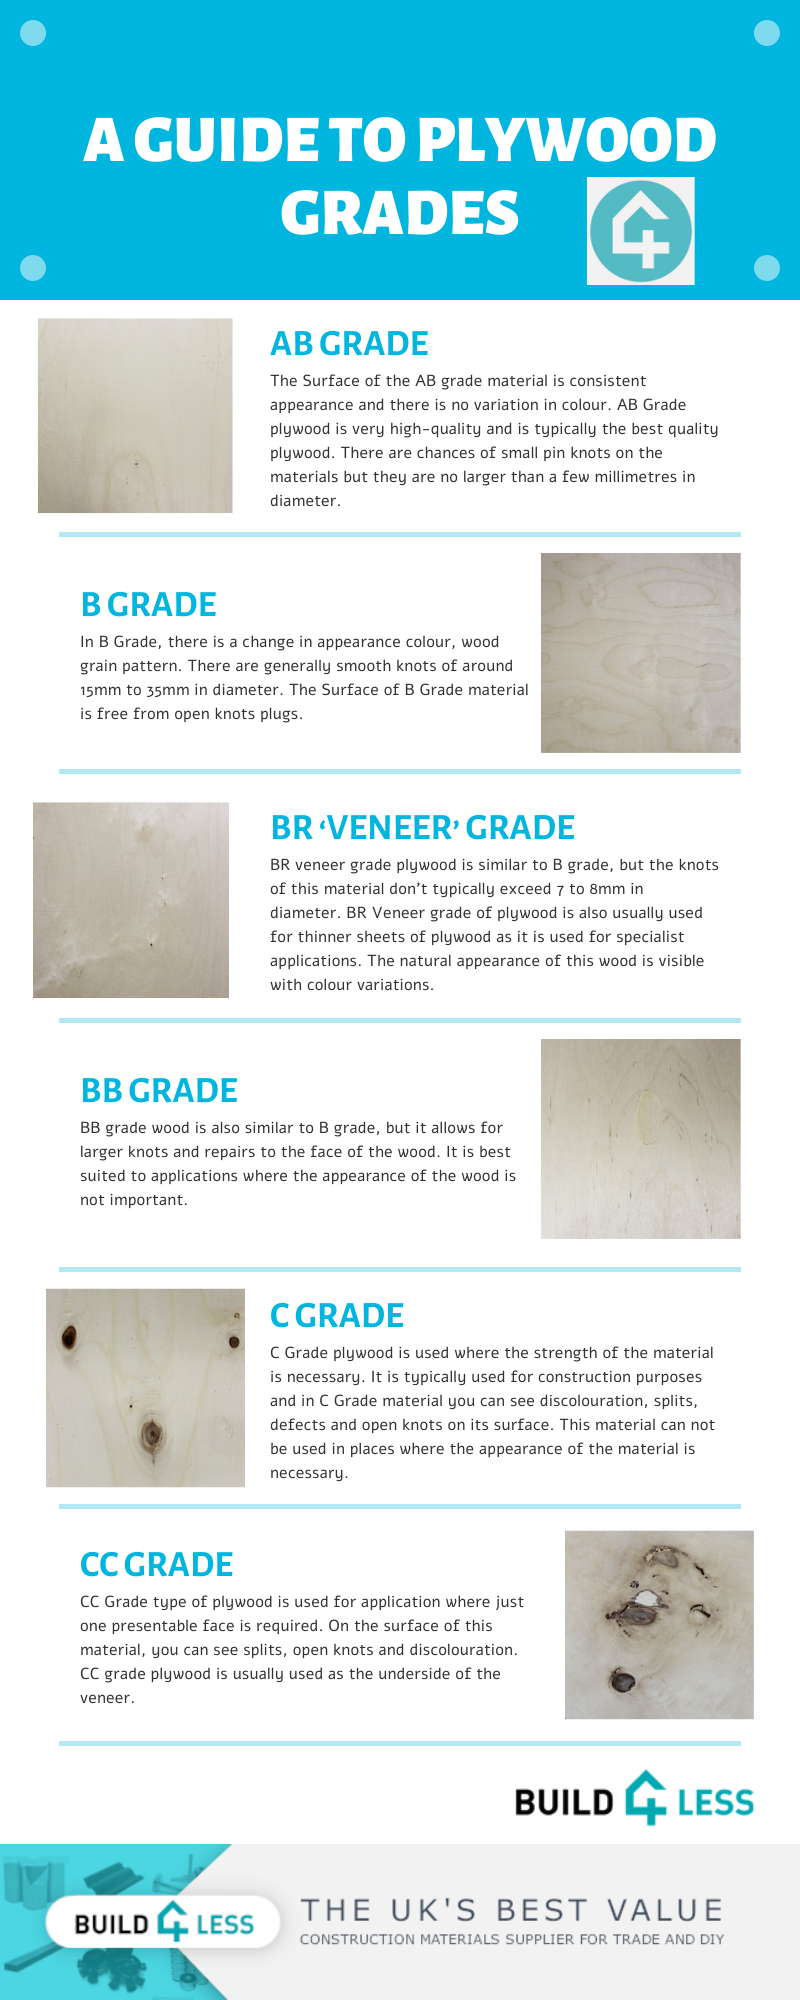 Types of Plywood Grades